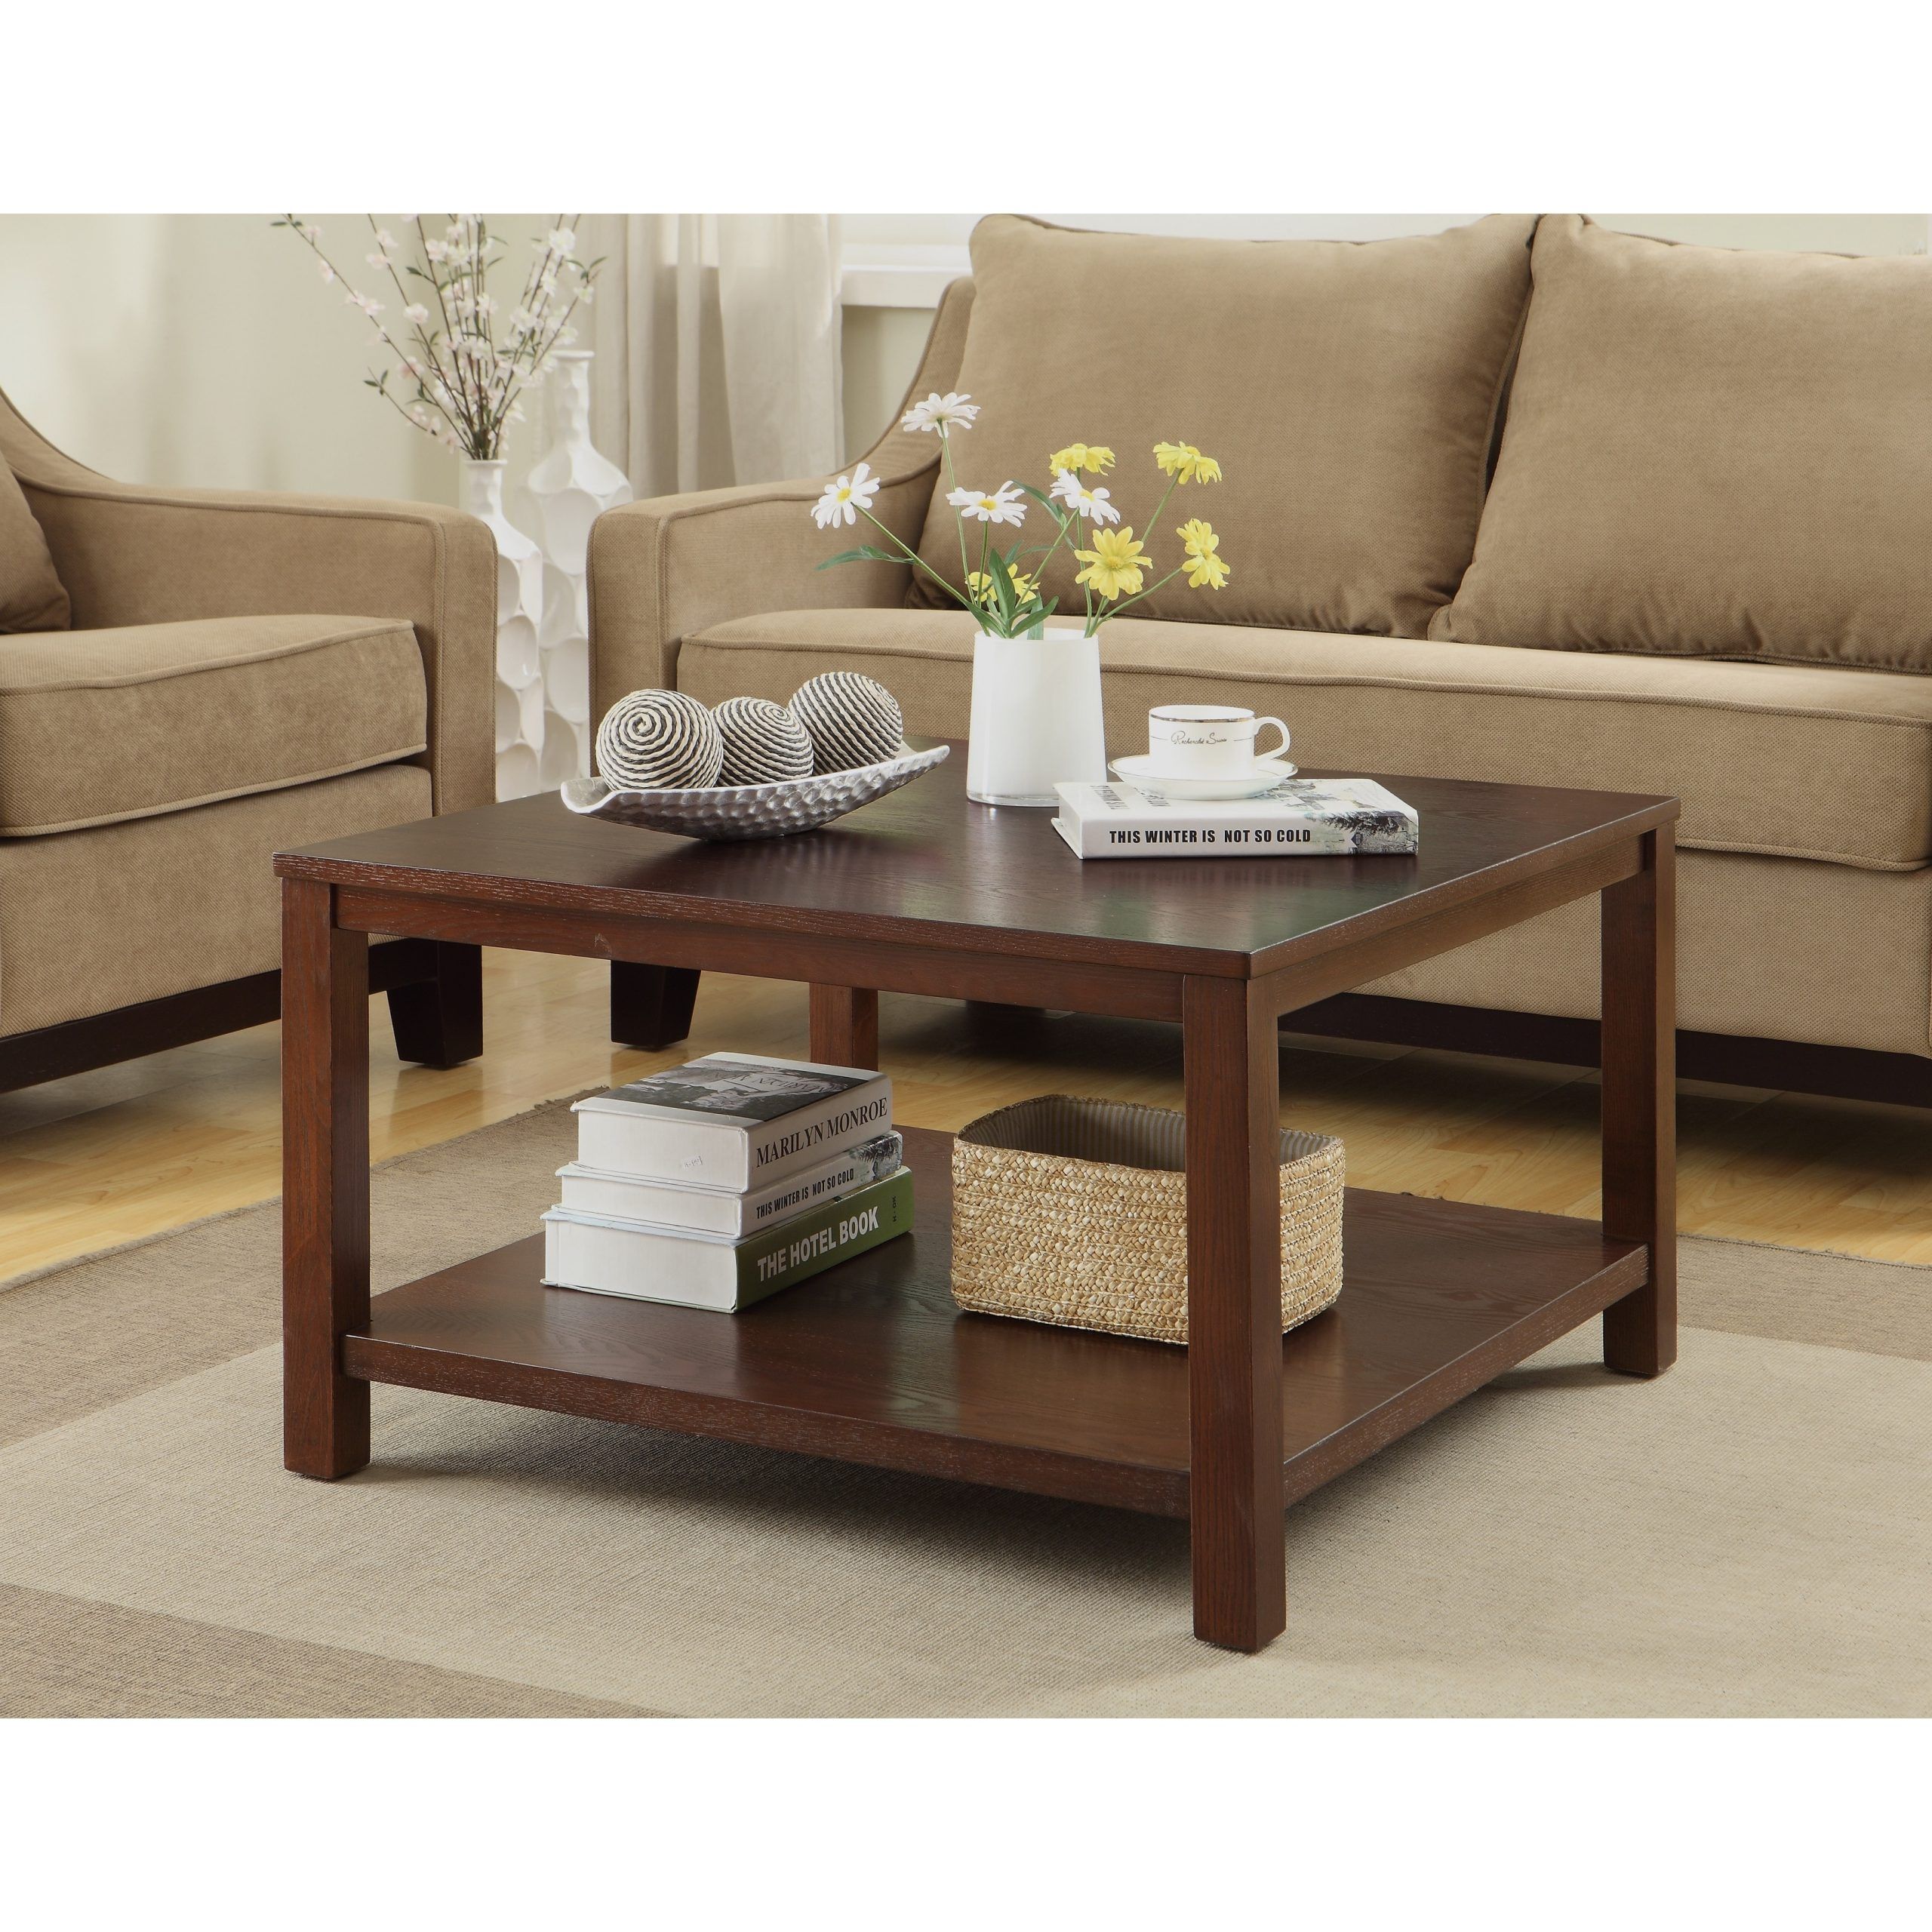 Square Coffee Table With Dual Shelves Solid Wood Legs & Wood | Ebay With Regard To Coffee Tables With Solid Legs (Photo 11 of 15)